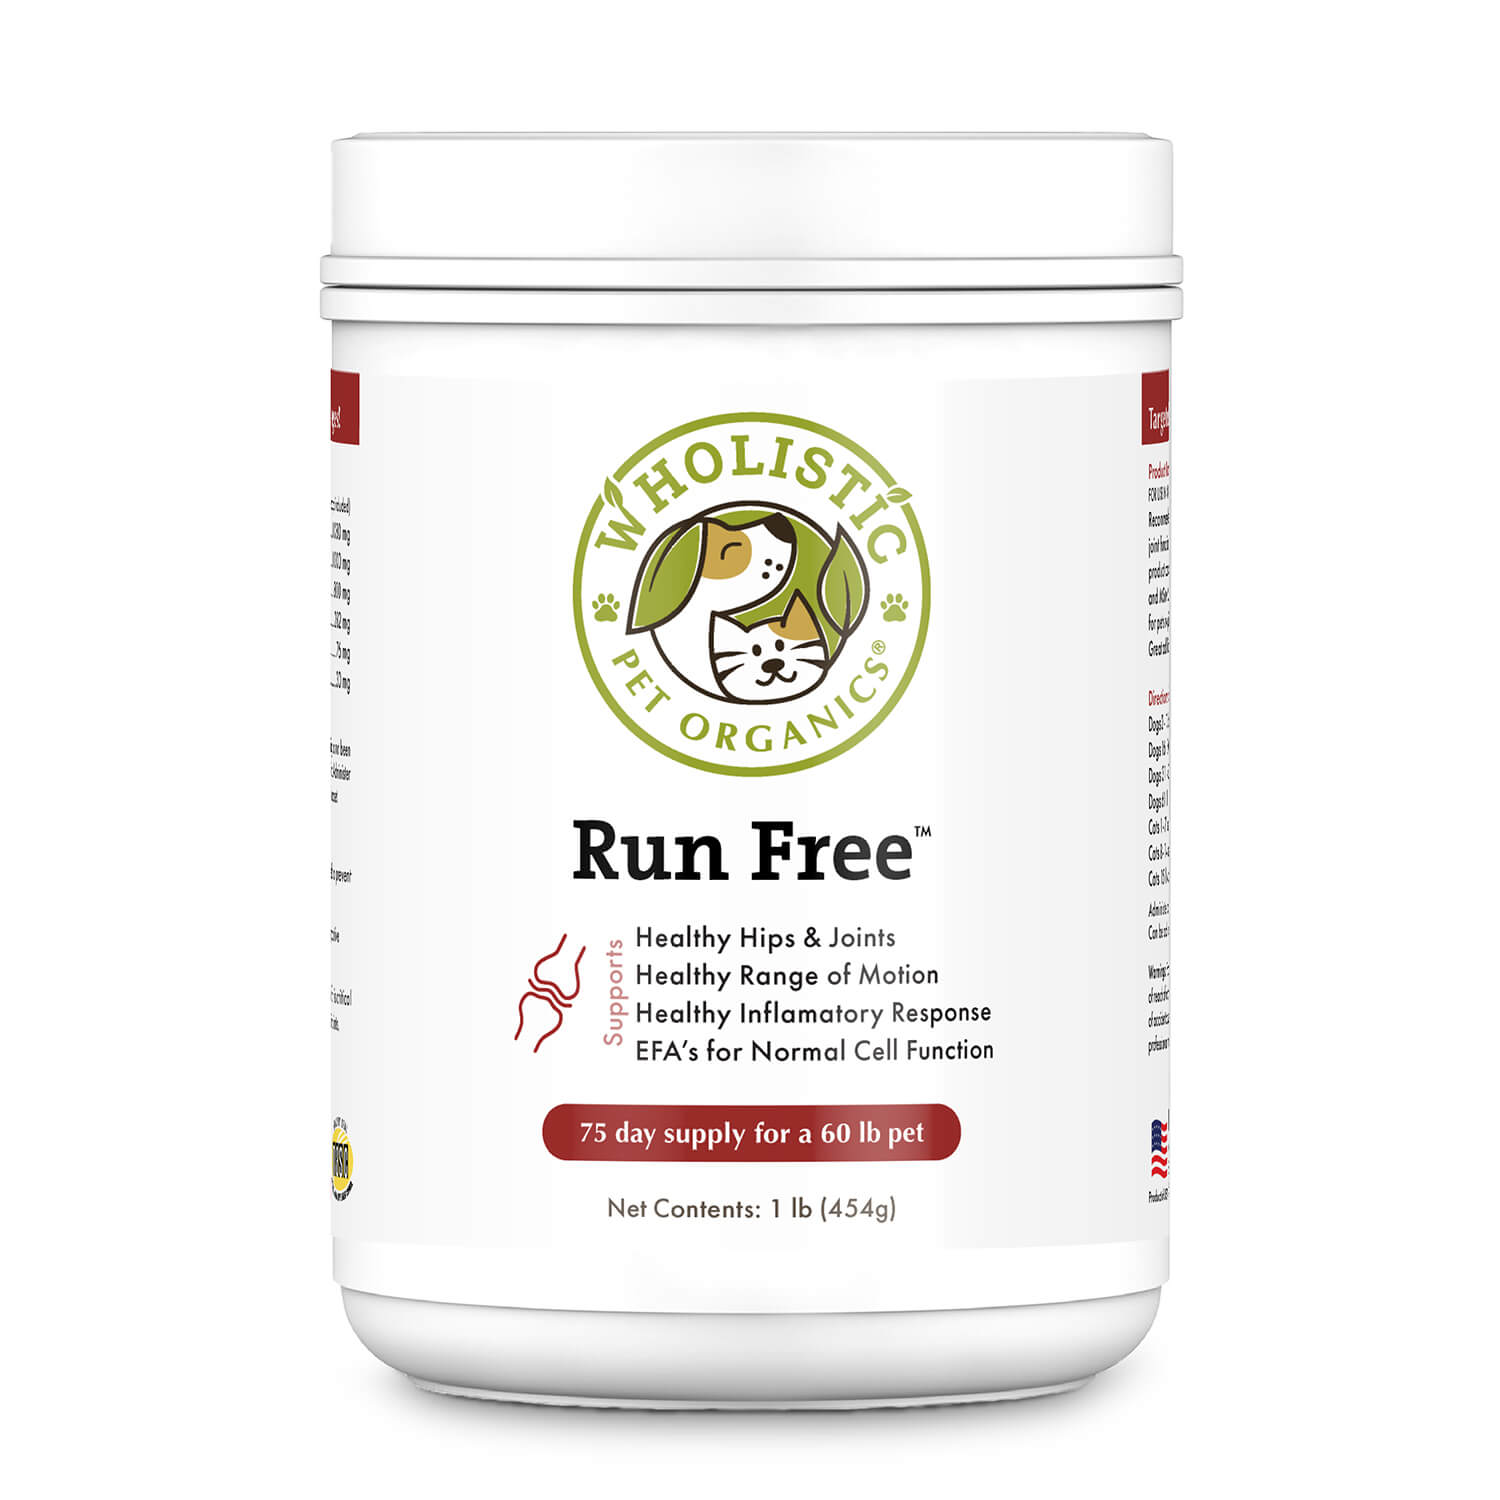 Wholistic Pet Organics Run Free for targeted joint support in dogs and cats